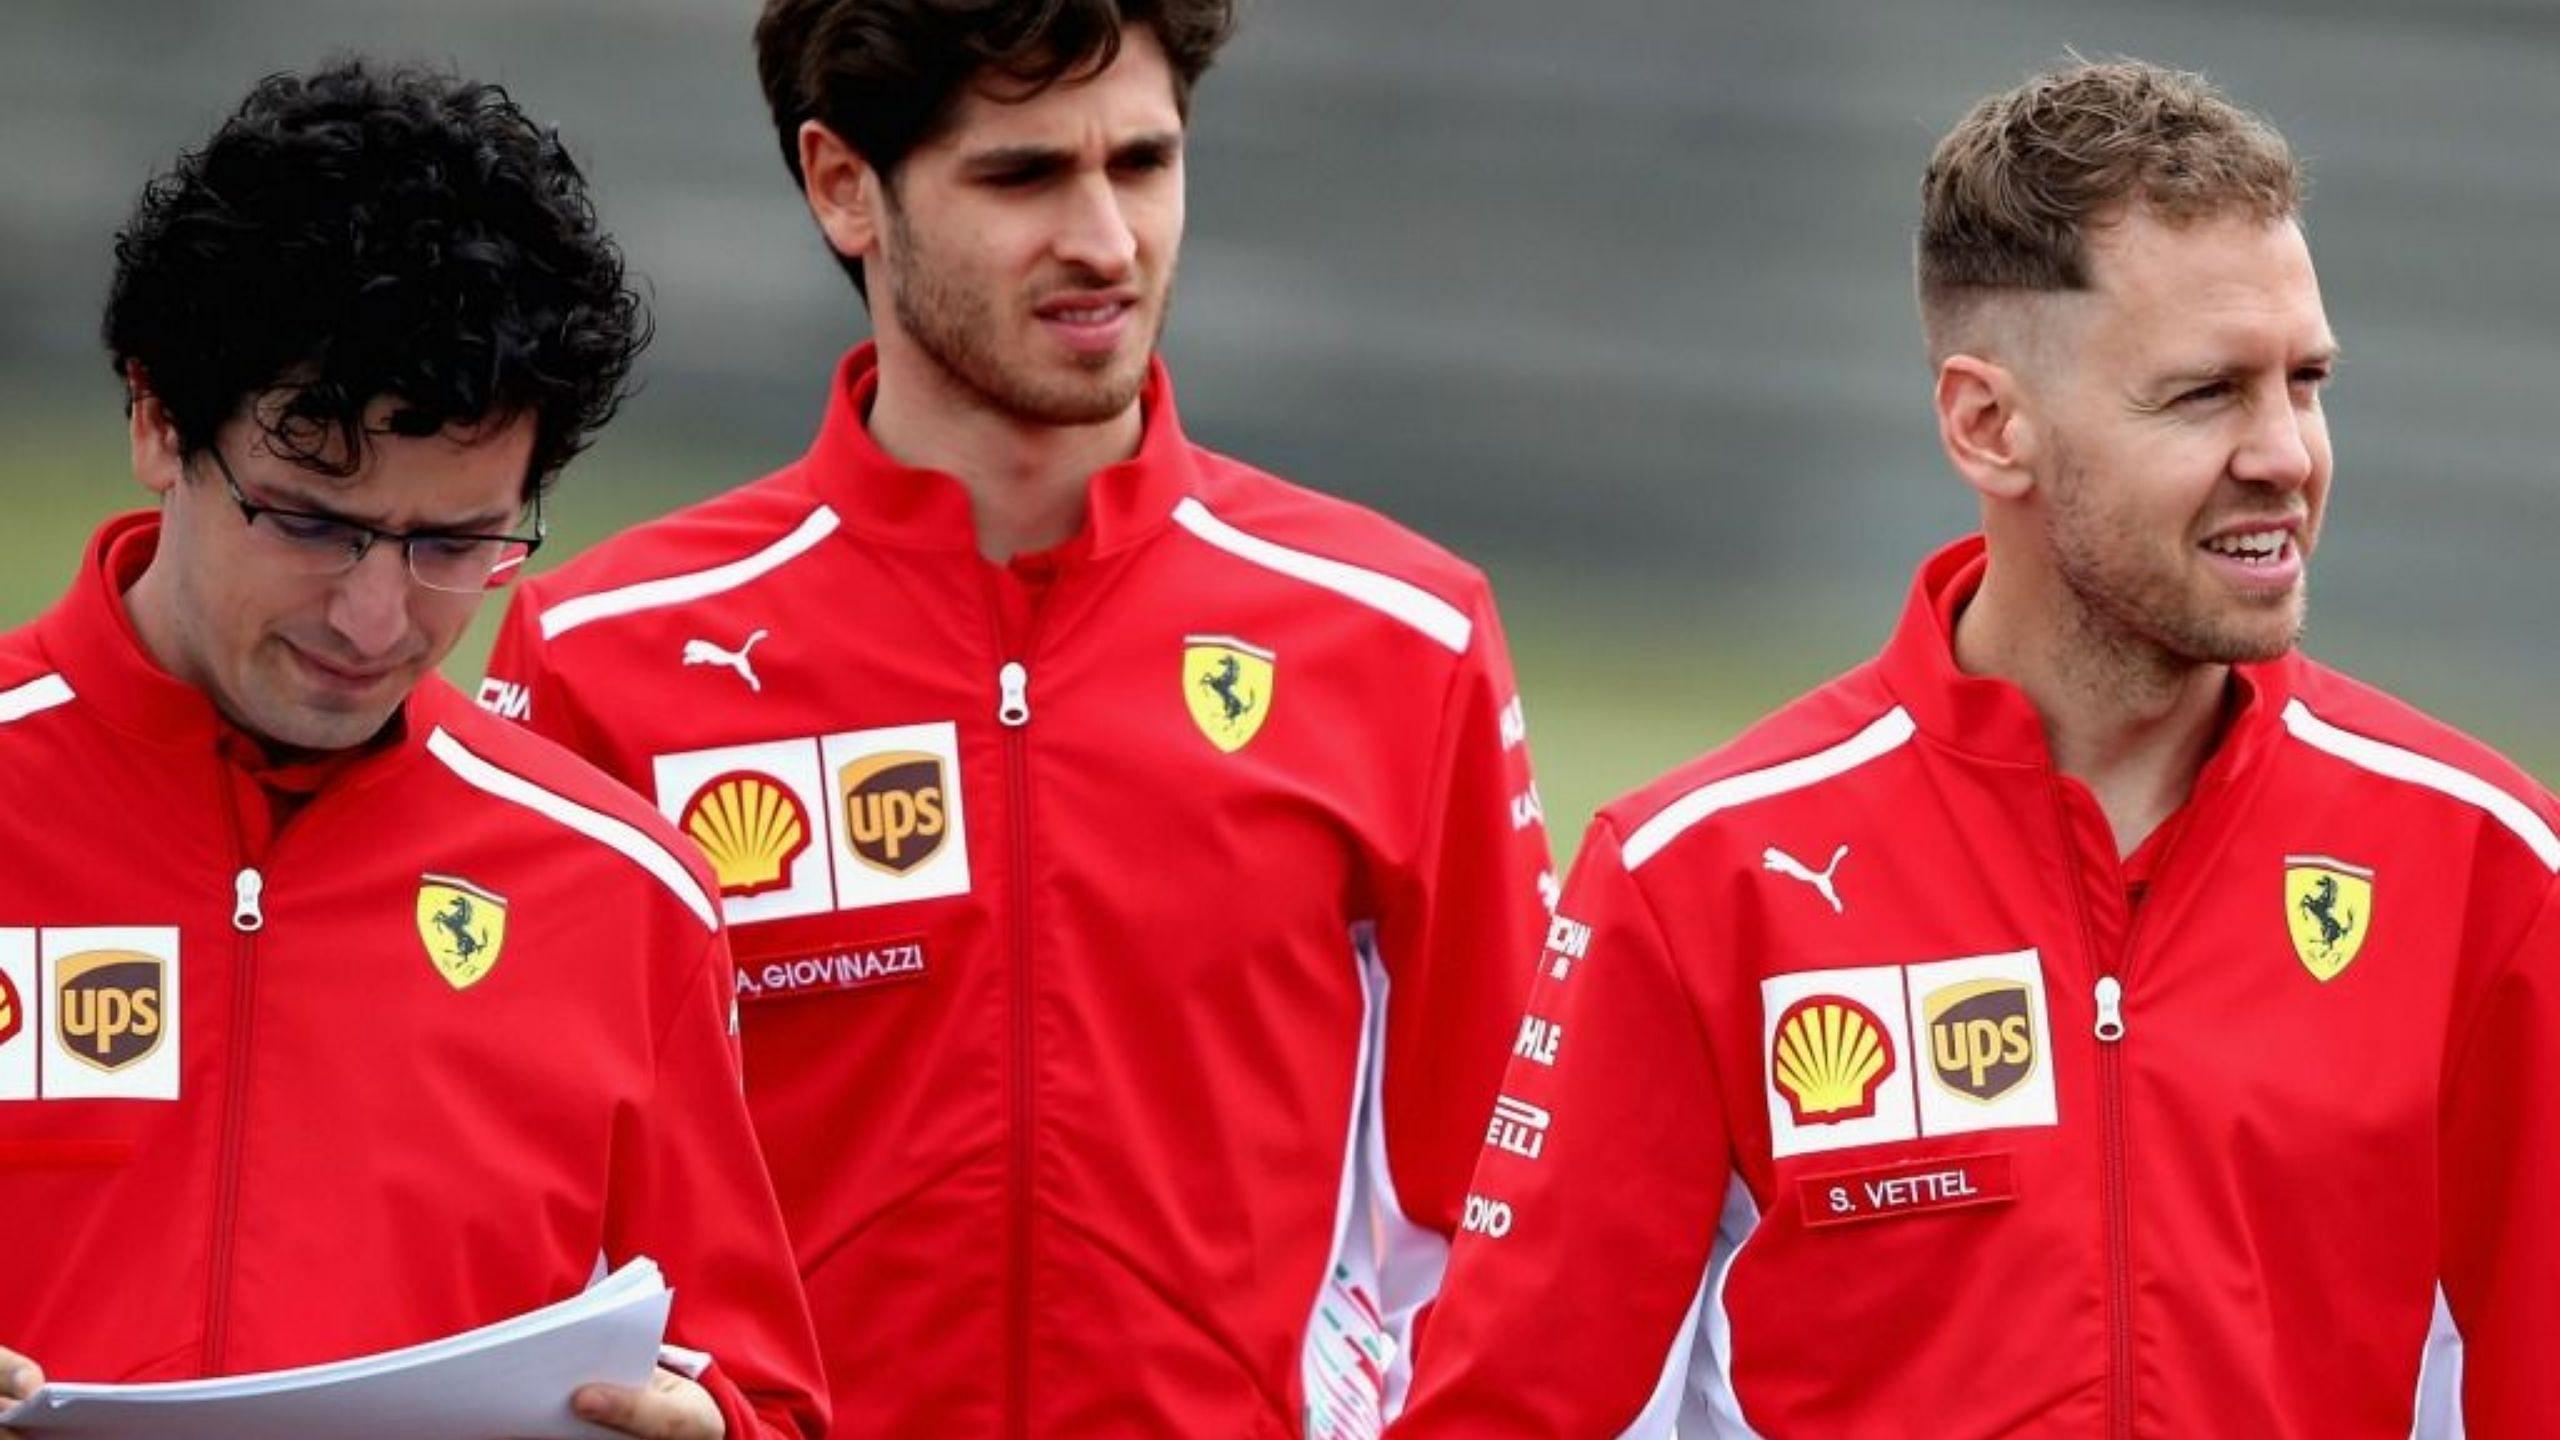 "I know Carlos will be there for a few years" - Antonio Giovinazzi not giving up on his dream to race for Ferrari